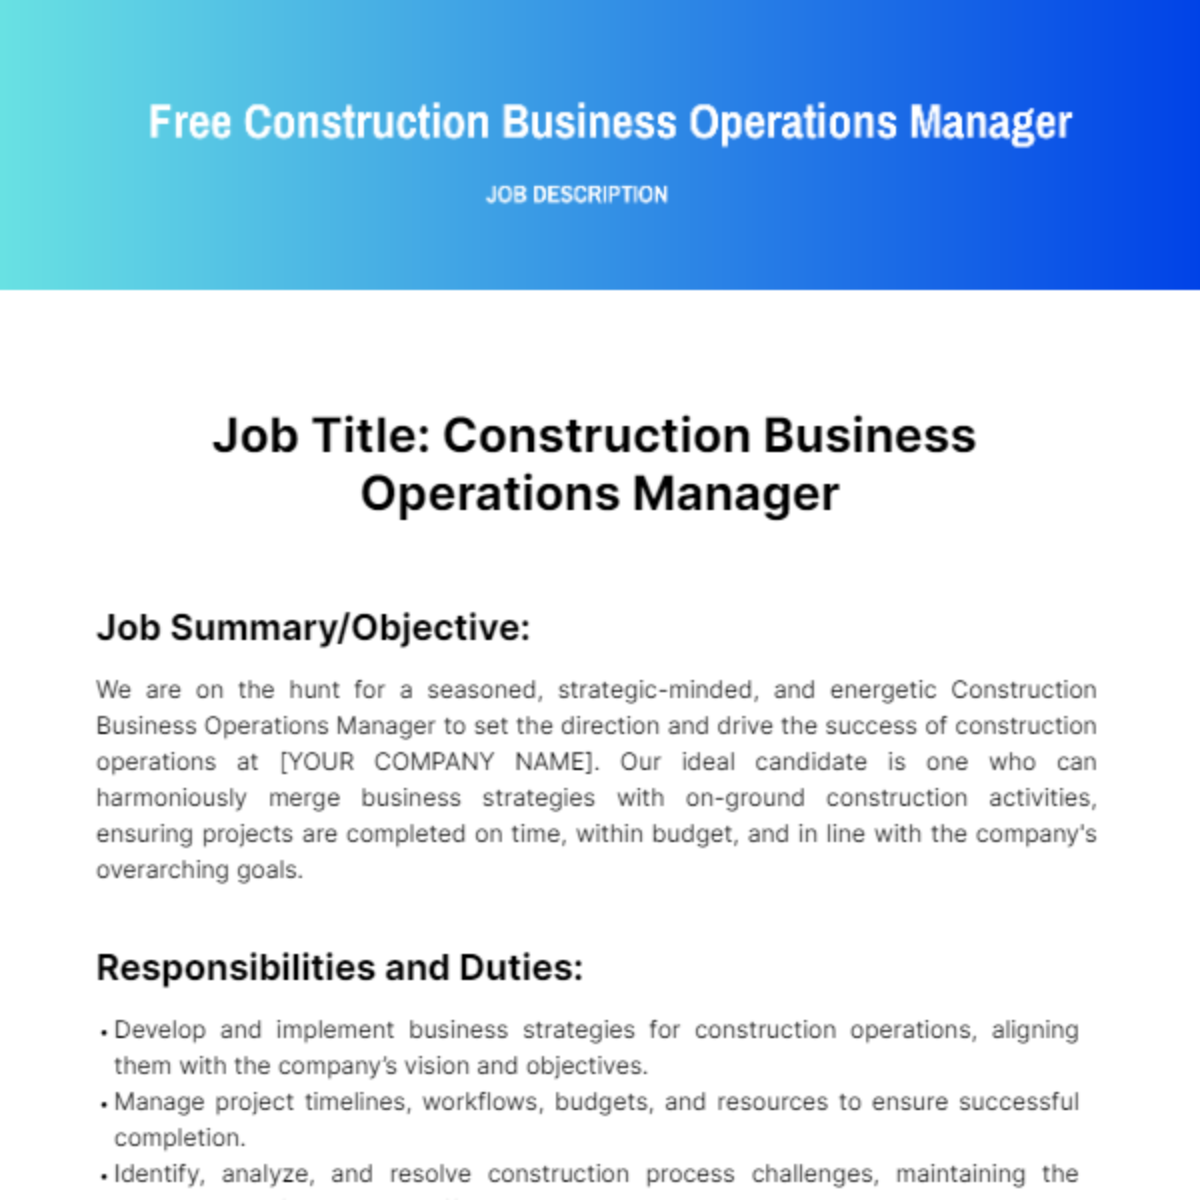 Free Construction Business Operations Manager Job Description Template